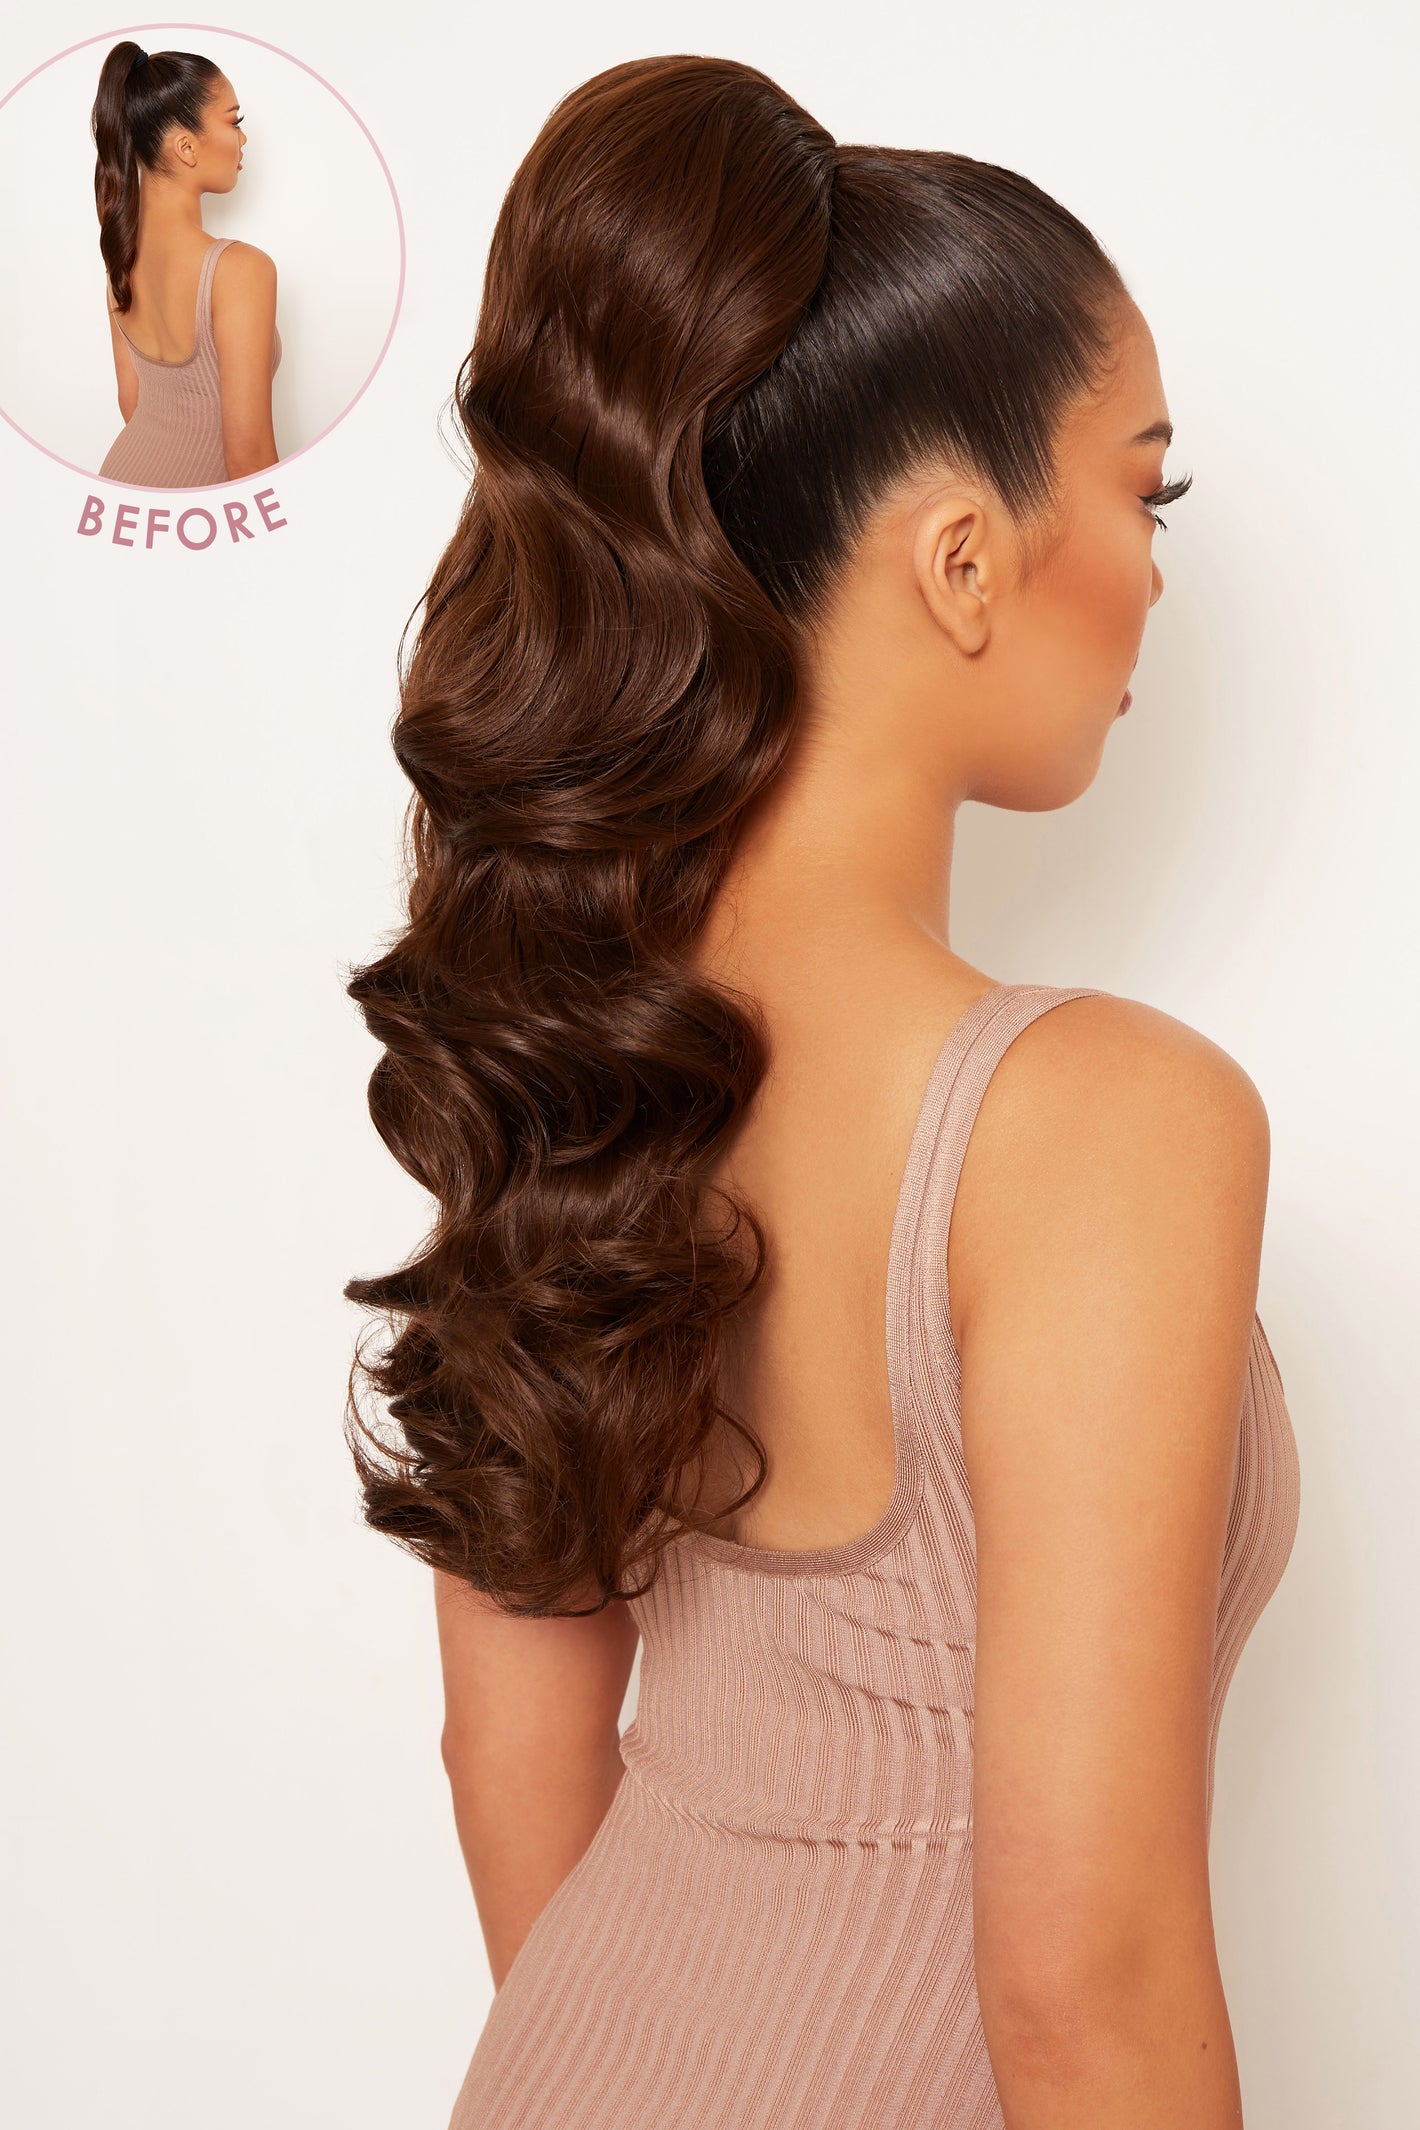 Deep Curly Brazilian Hair Low Curly Ponytail Extension 160g, Low/High  Wraps, Drawstring Closure, Jet Puff Afro For Black Women From Echoli2013,  $61.03 | DHgate.Com